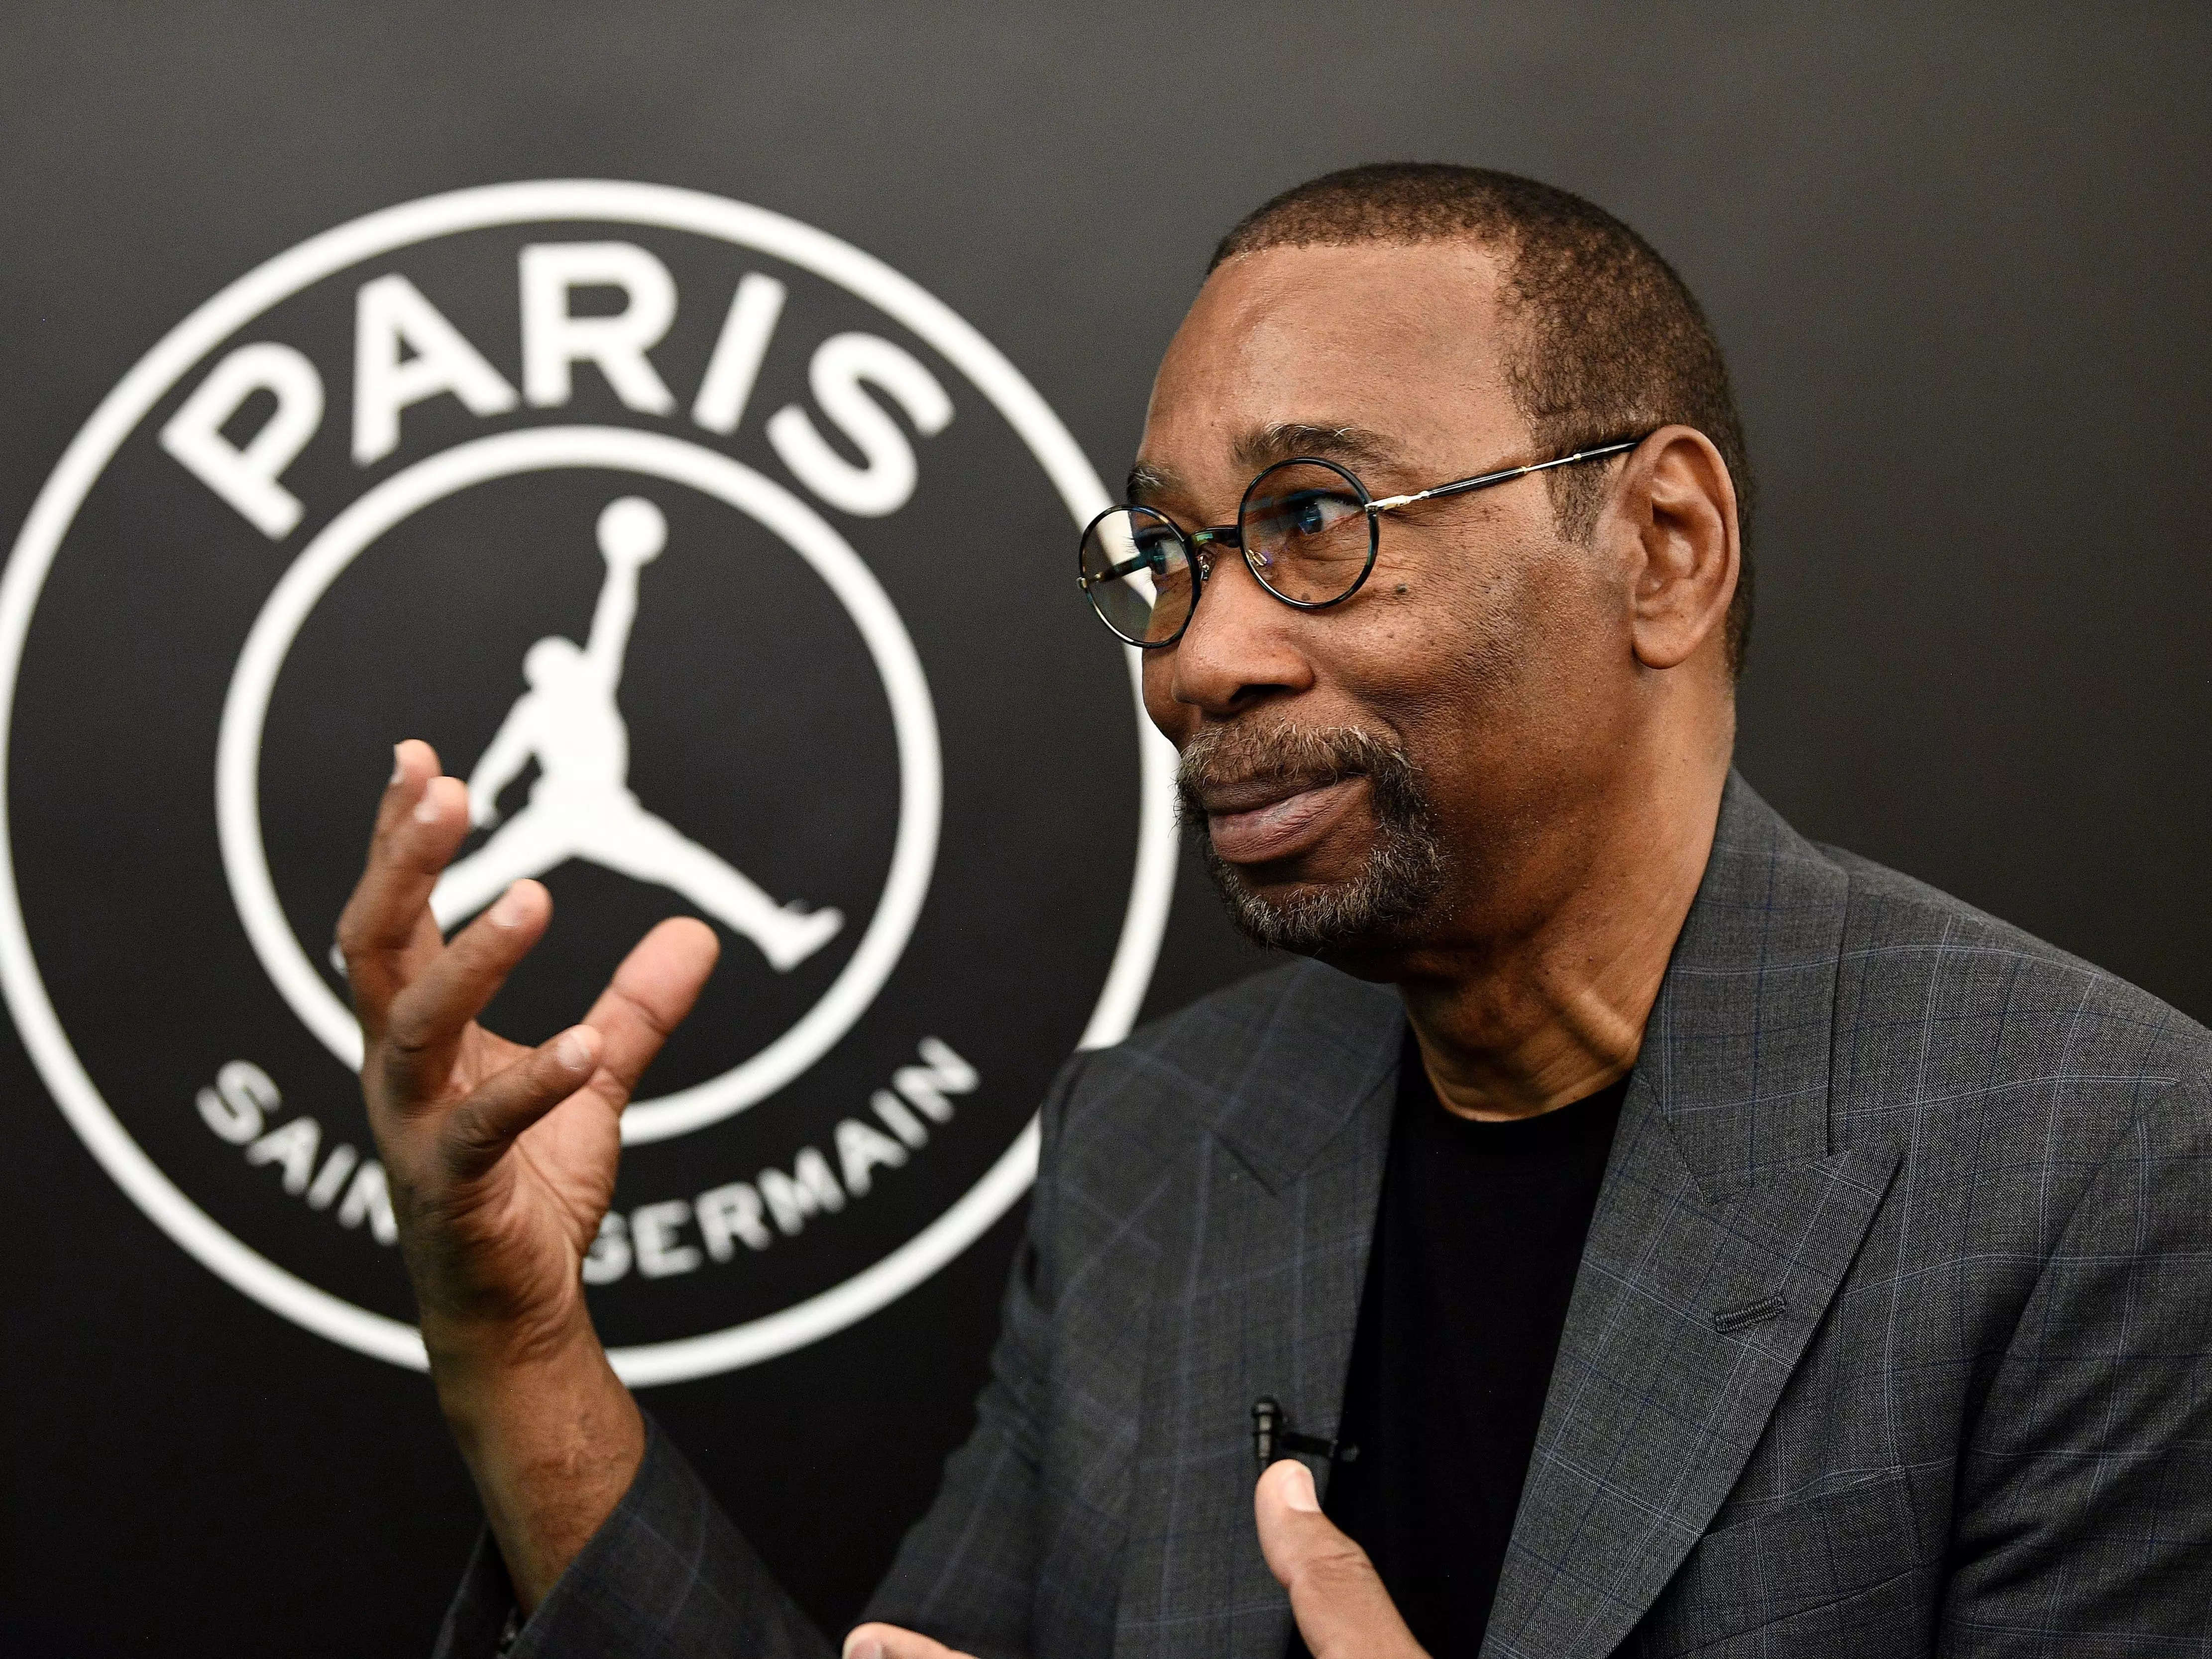 Larry the chairman of Nike's Jordan brand, says he killed 18-year-old after a gang fight 1965 | Business India